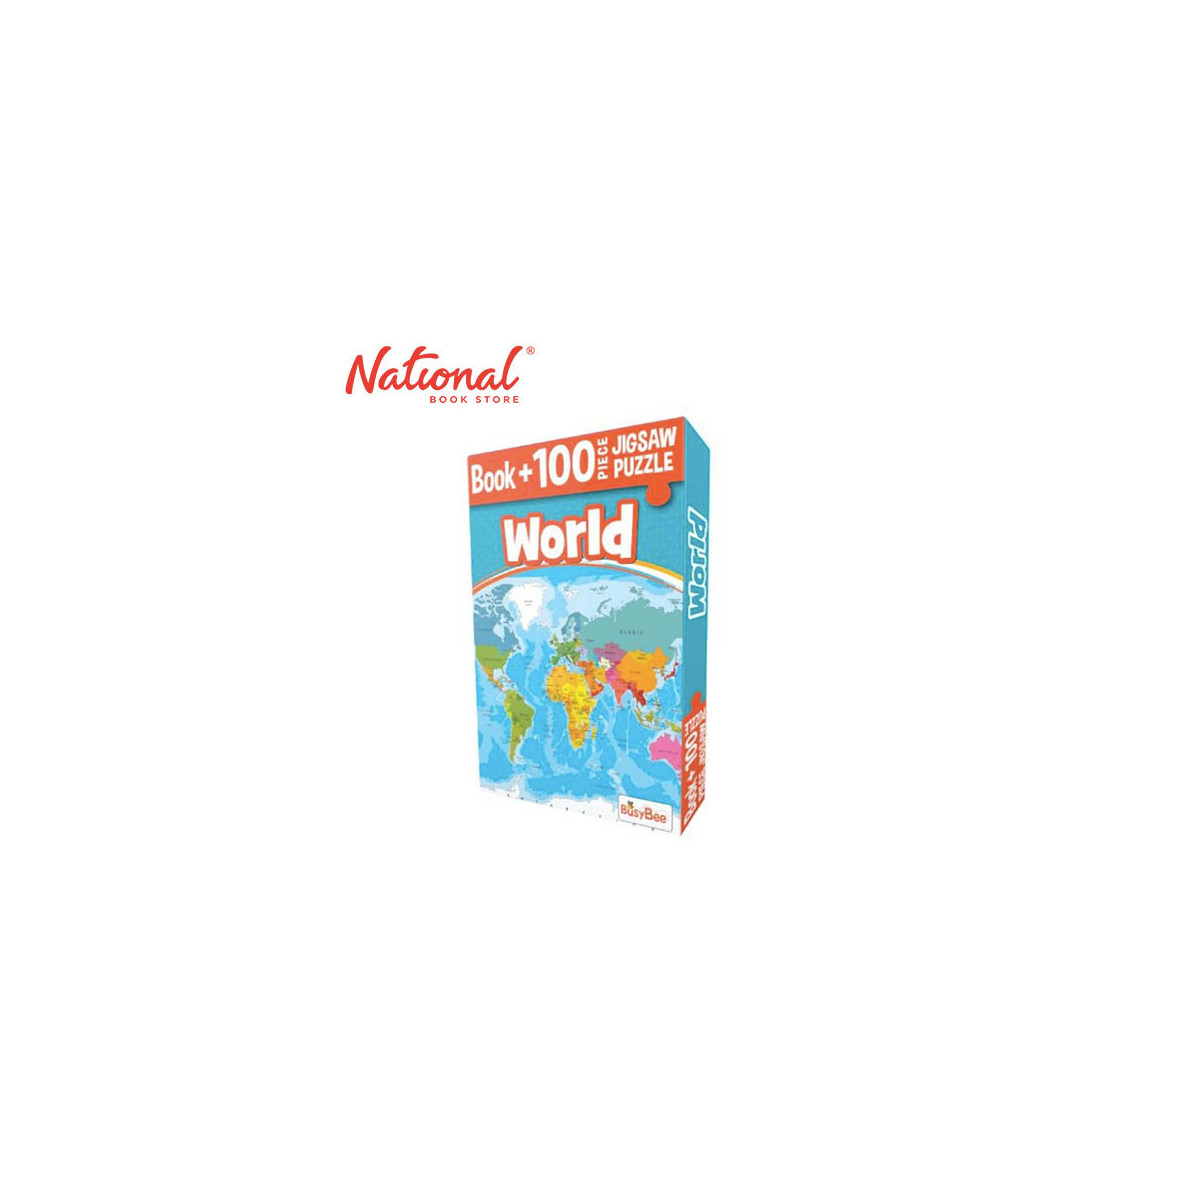 WORLD BOOK + 100 PIECES JIGSAW PUZZLE - HOBBIES FOR KIDS